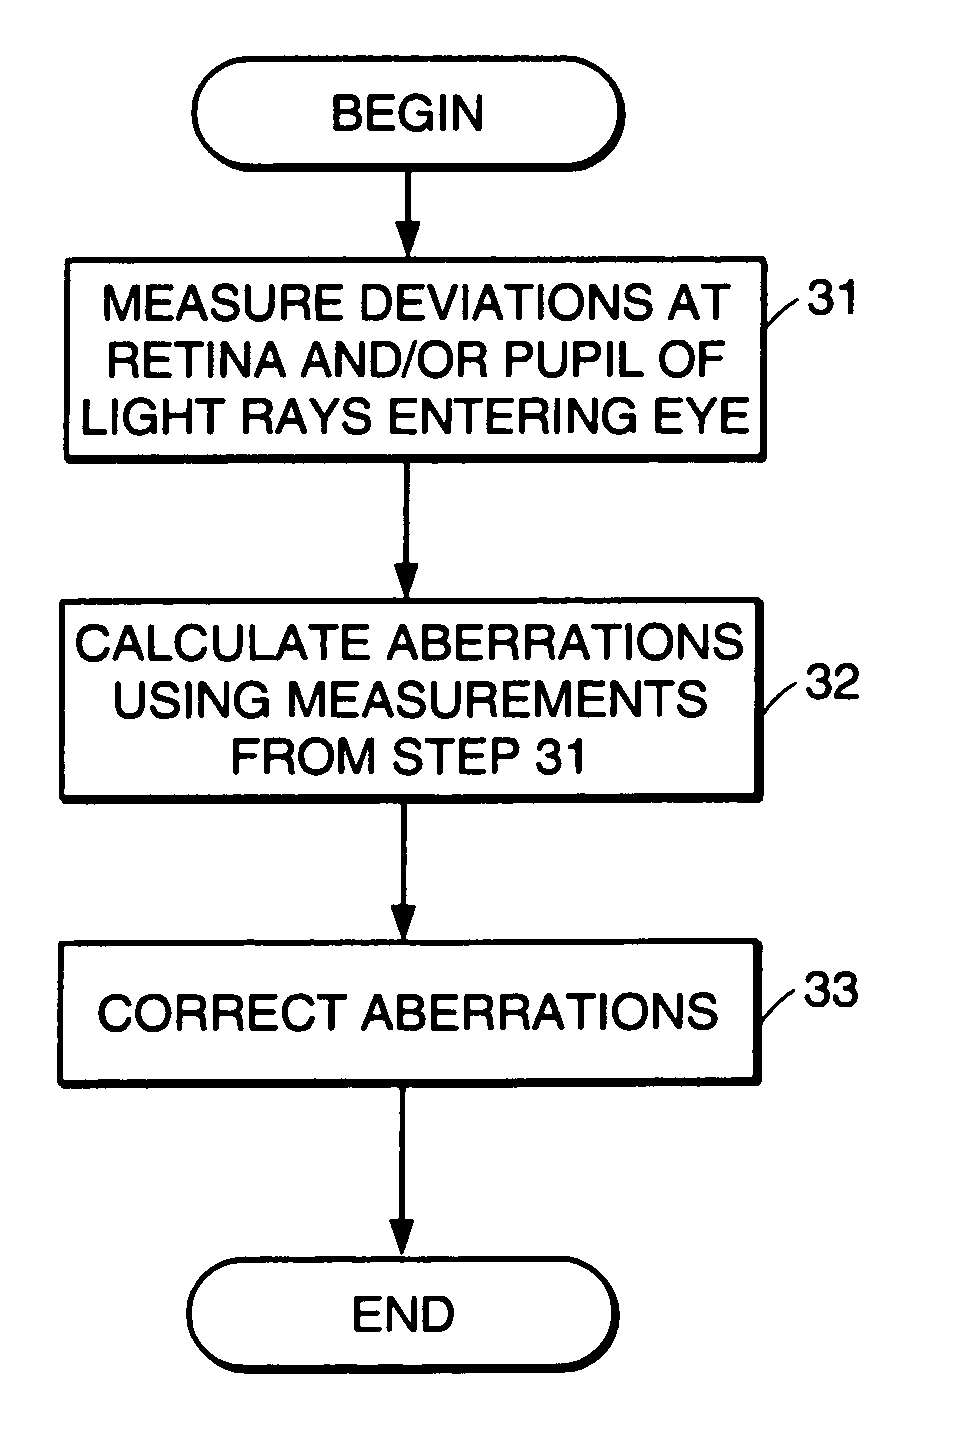 Method for preventing myopia progression through identification and correction of optical aberrations